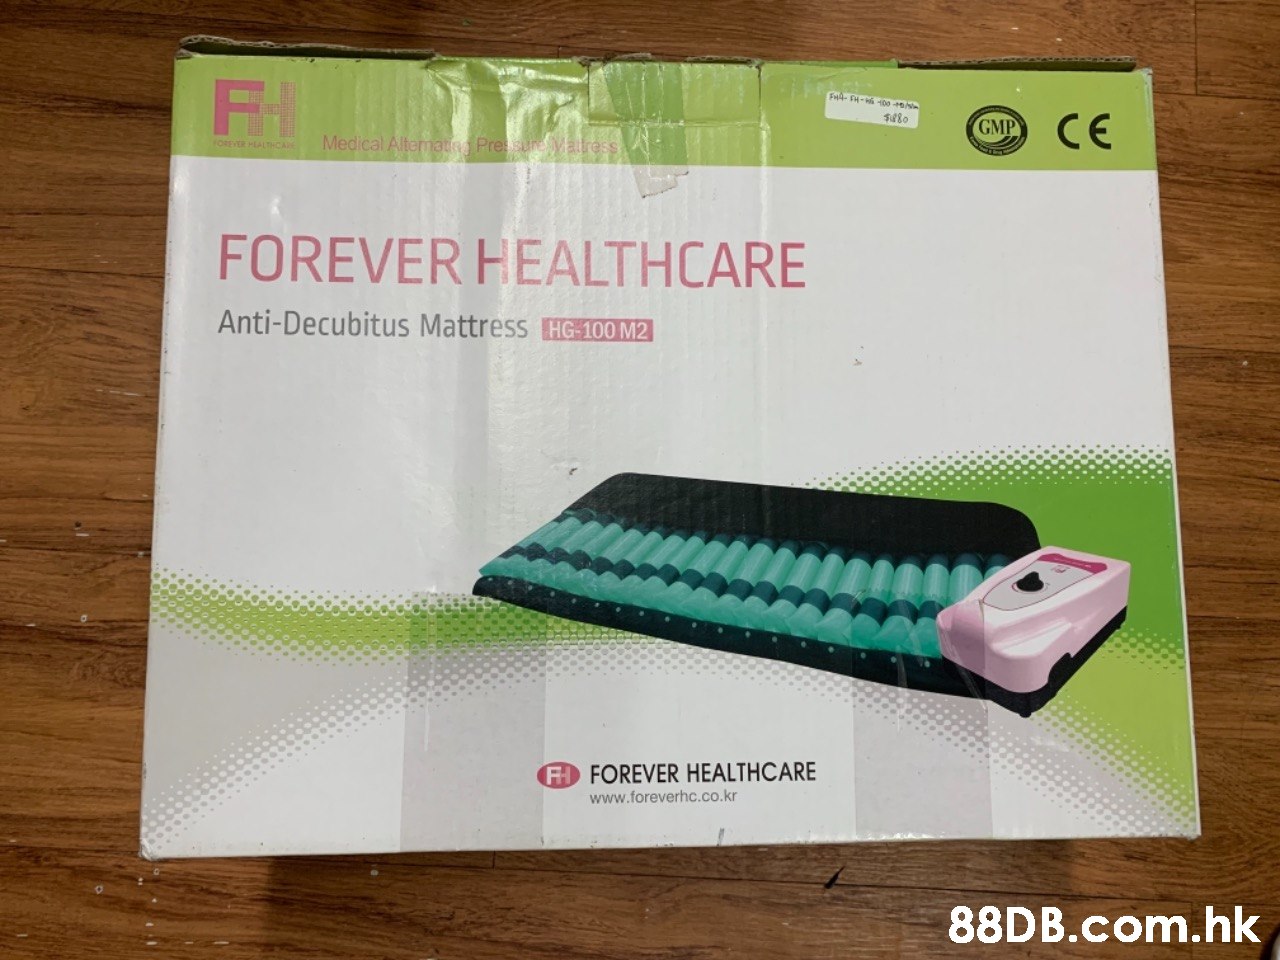 GMP FOREVER HEALTHCARE Anti-Decubitus Mattress HG:100 M2 F FOREVER HEALTHCARE www.foreverhc.co.kr .hk  Text,Technology,Electronic device,